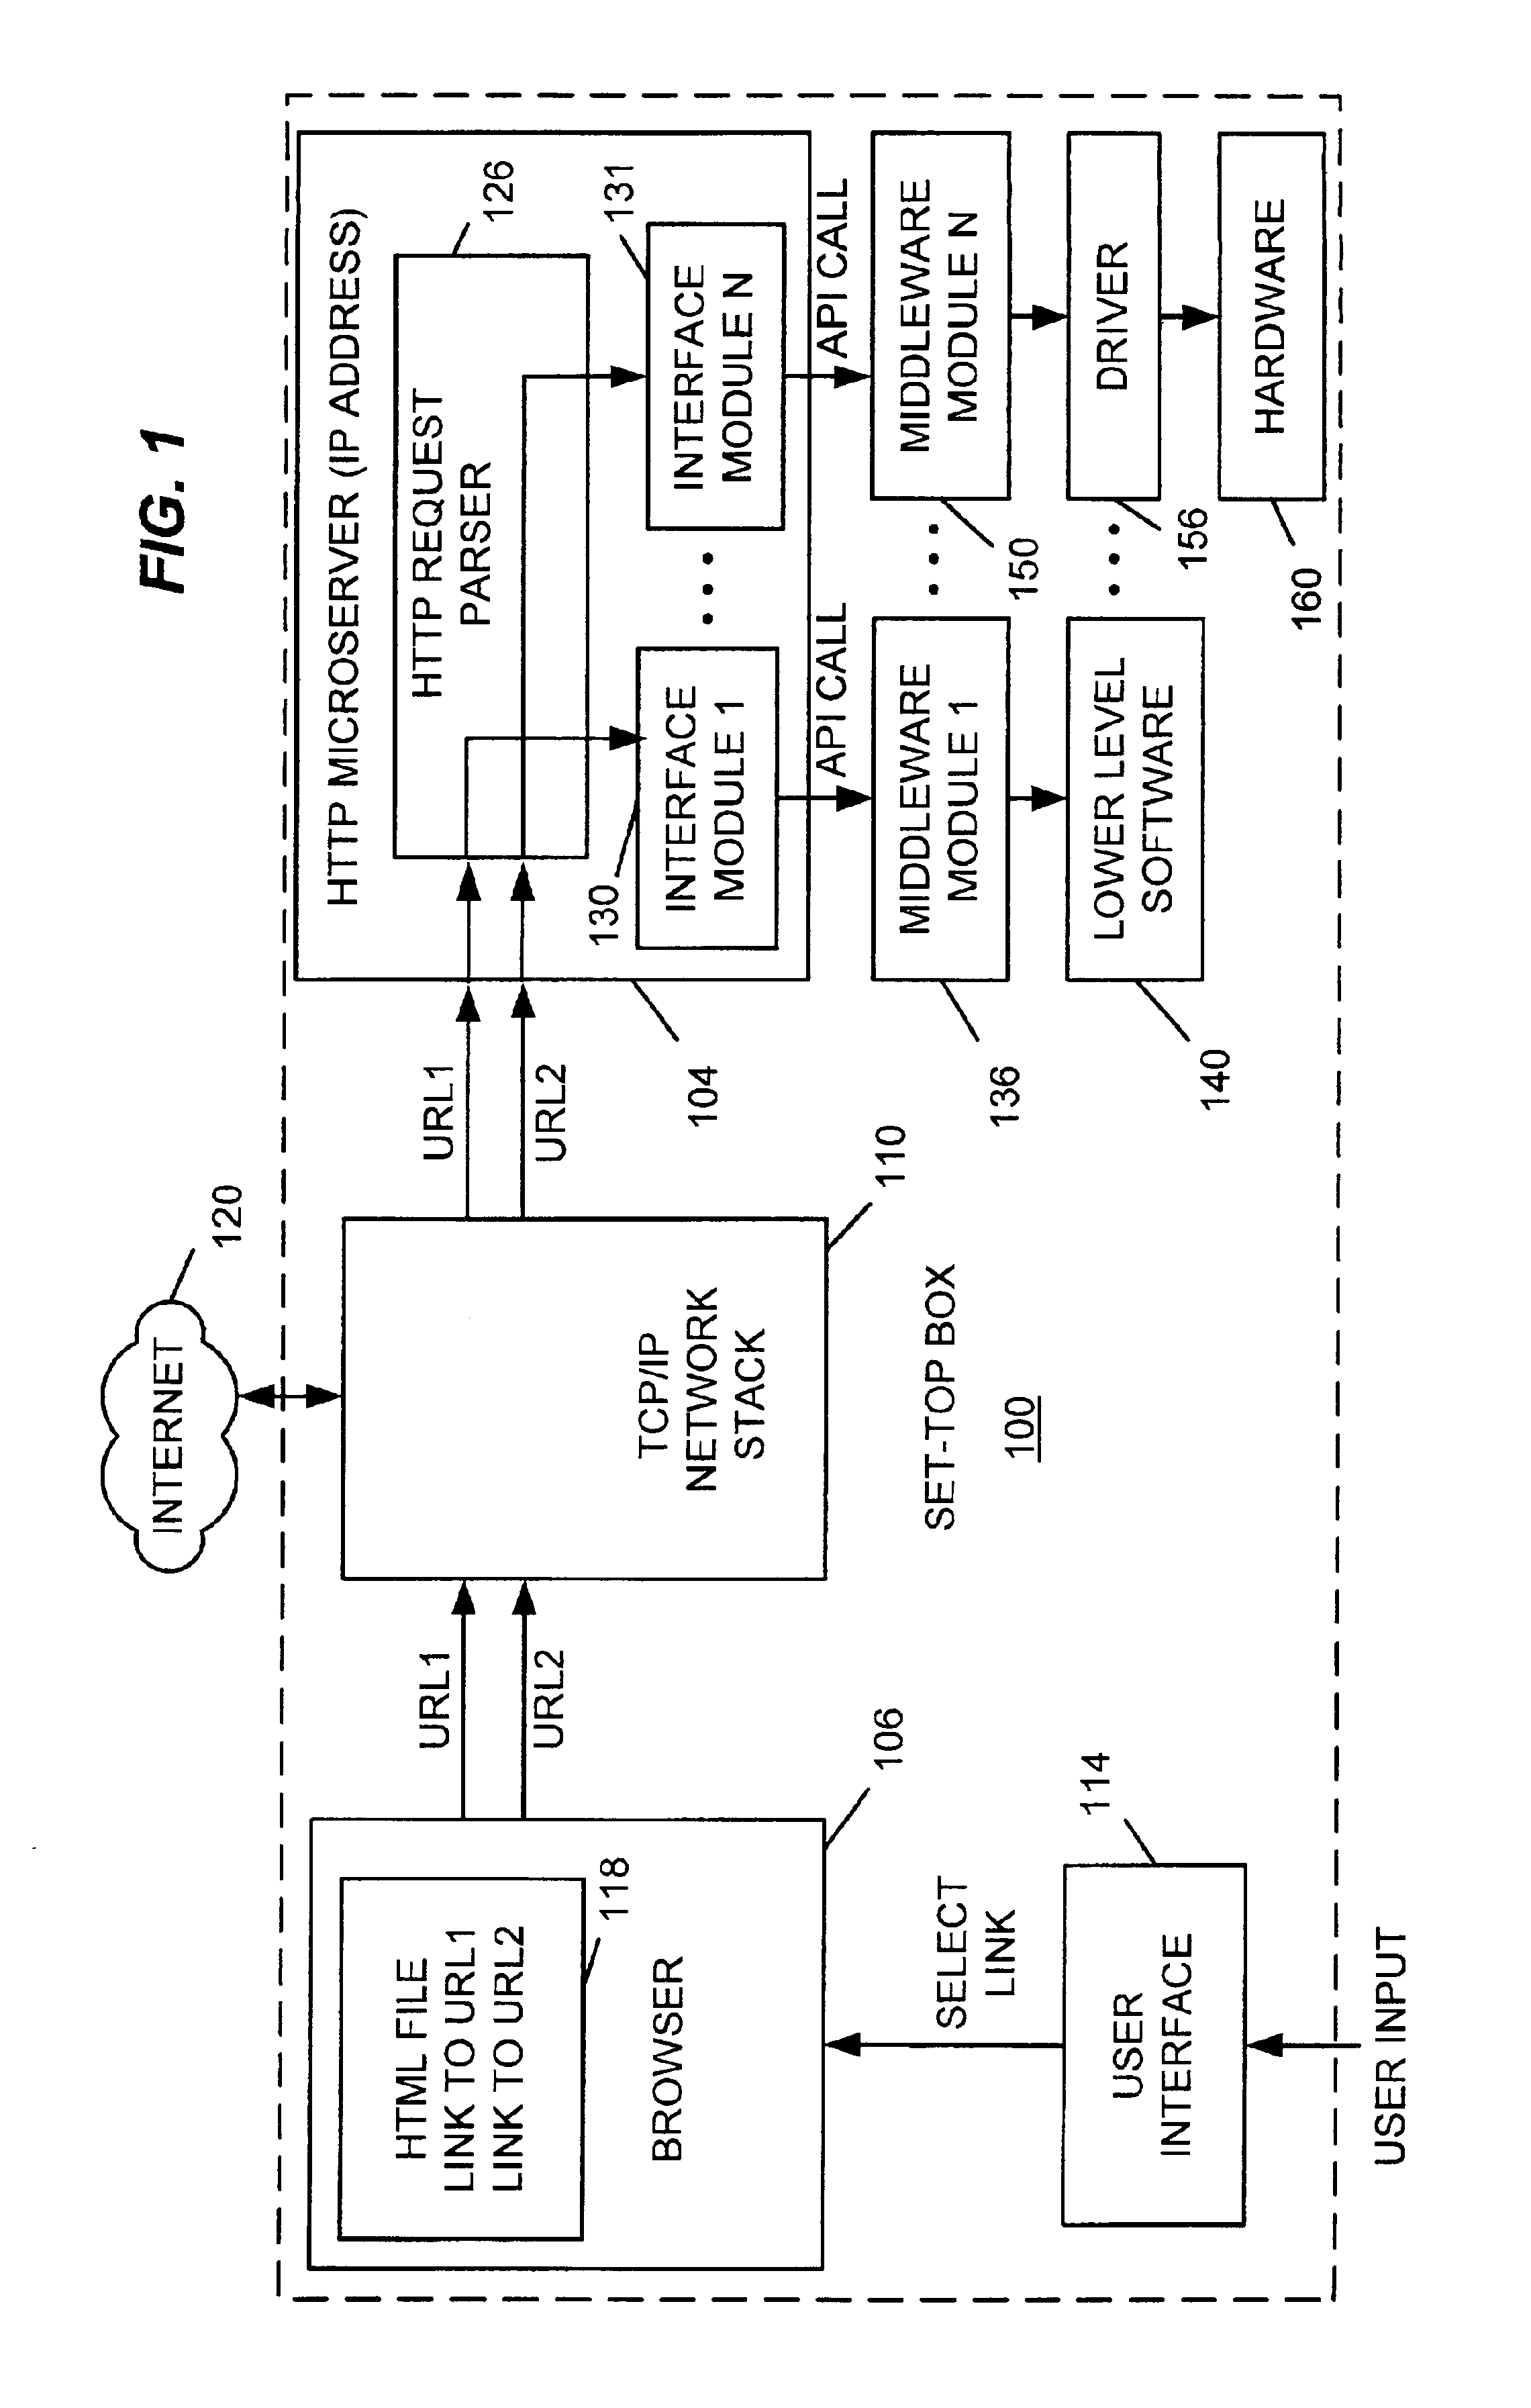 Method and apparatus for controlling set-top box hardware and software functions